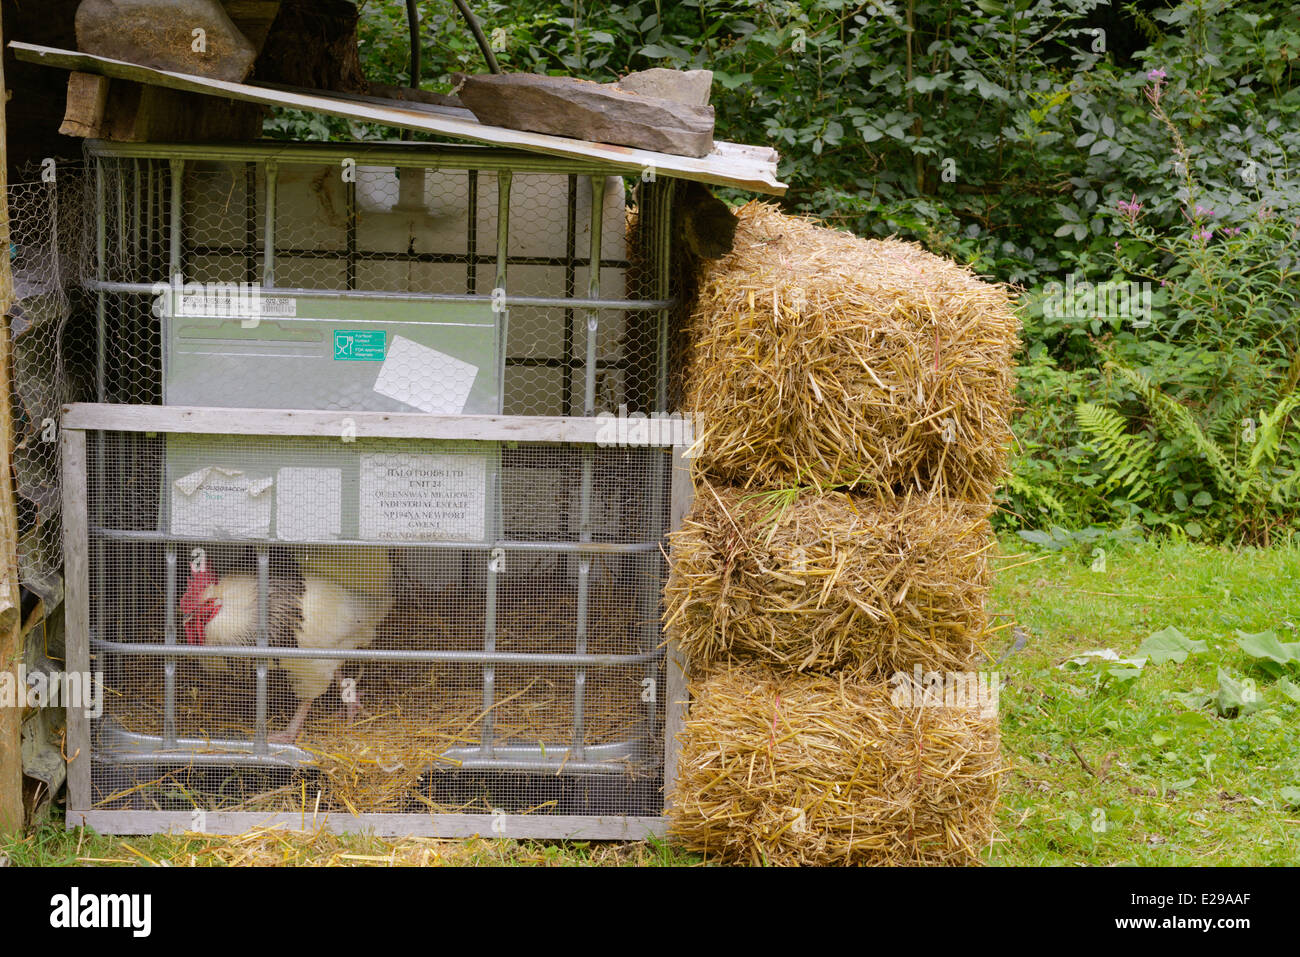 Light Sussex rooster in temporary housing constructed from recycled materials, Wales, UK Stock Photo